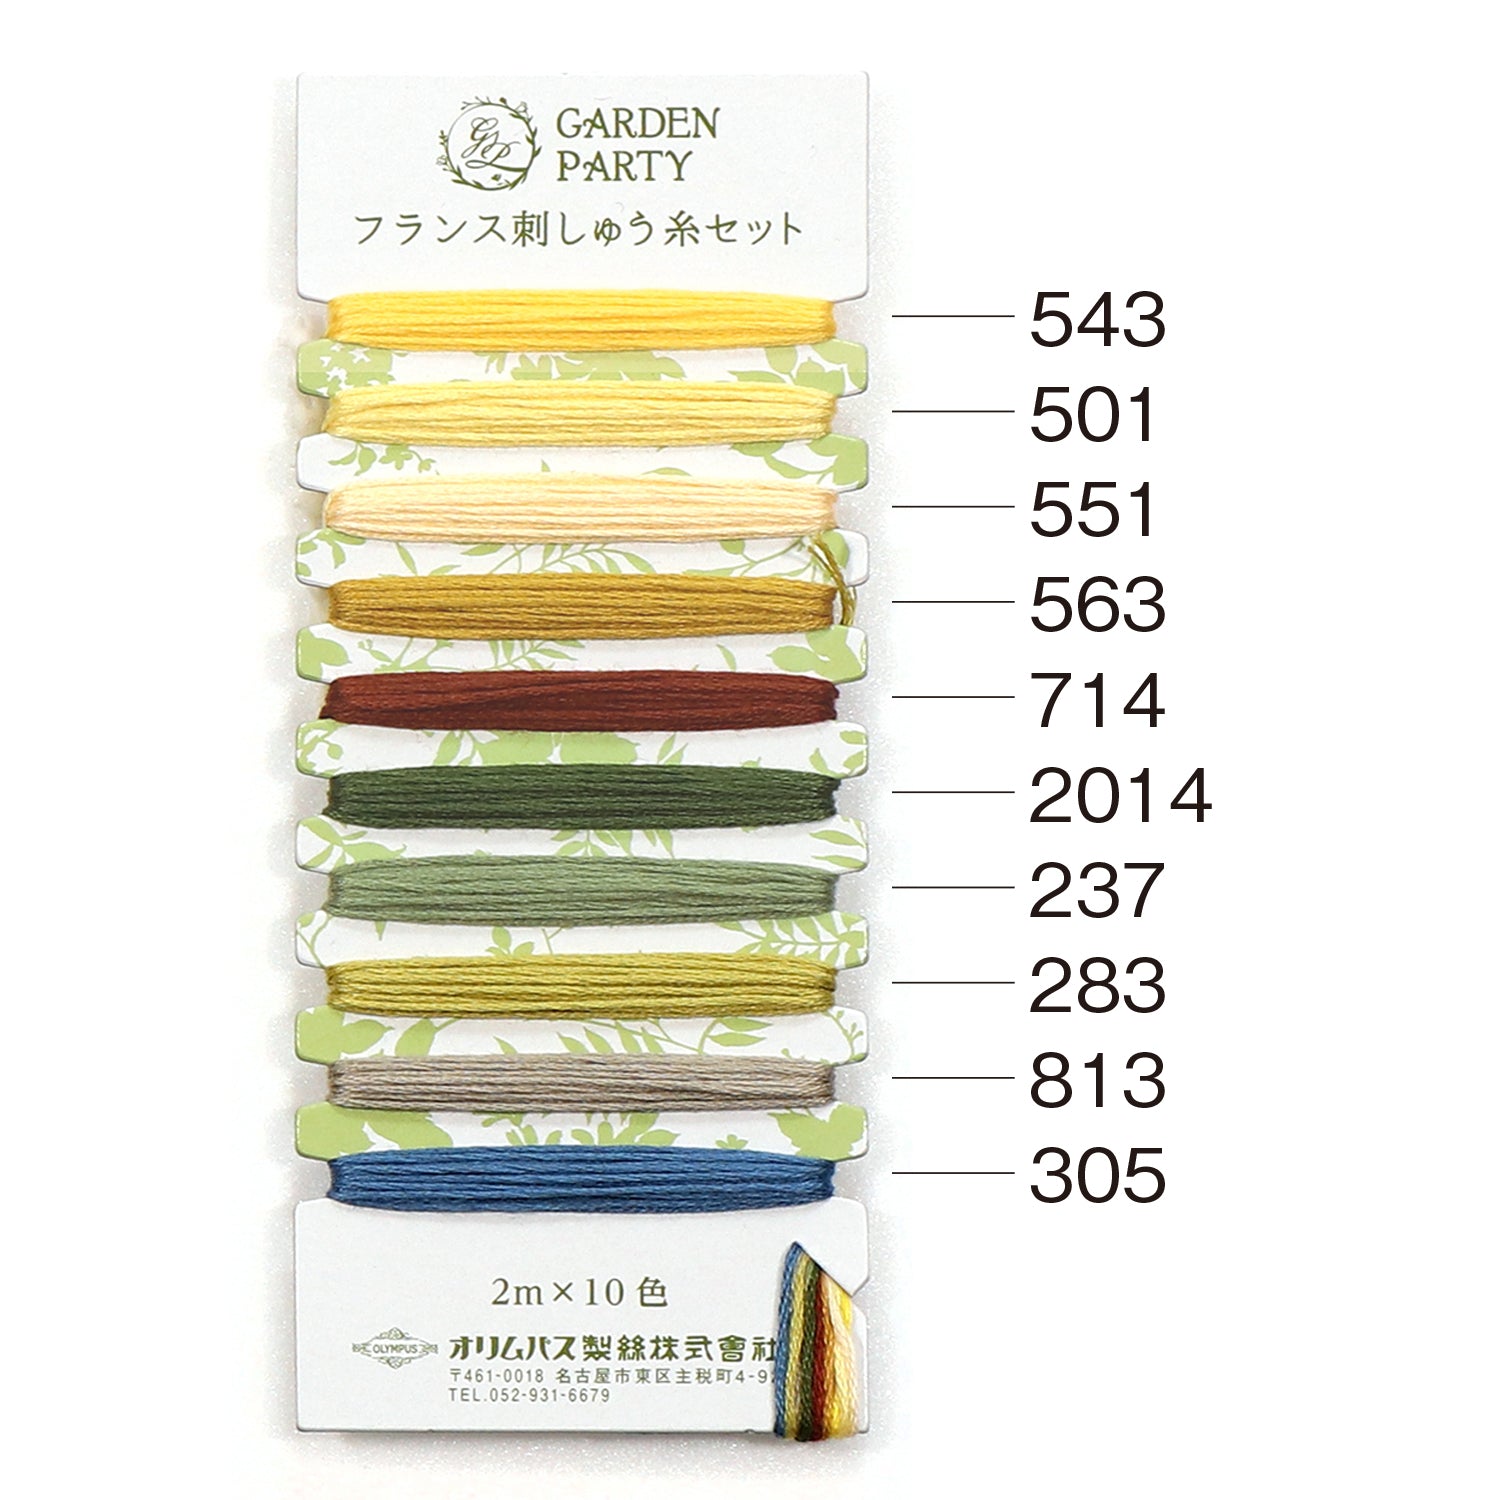 Olympus Garden Party Embroidery Floss Set - Stitched Modern